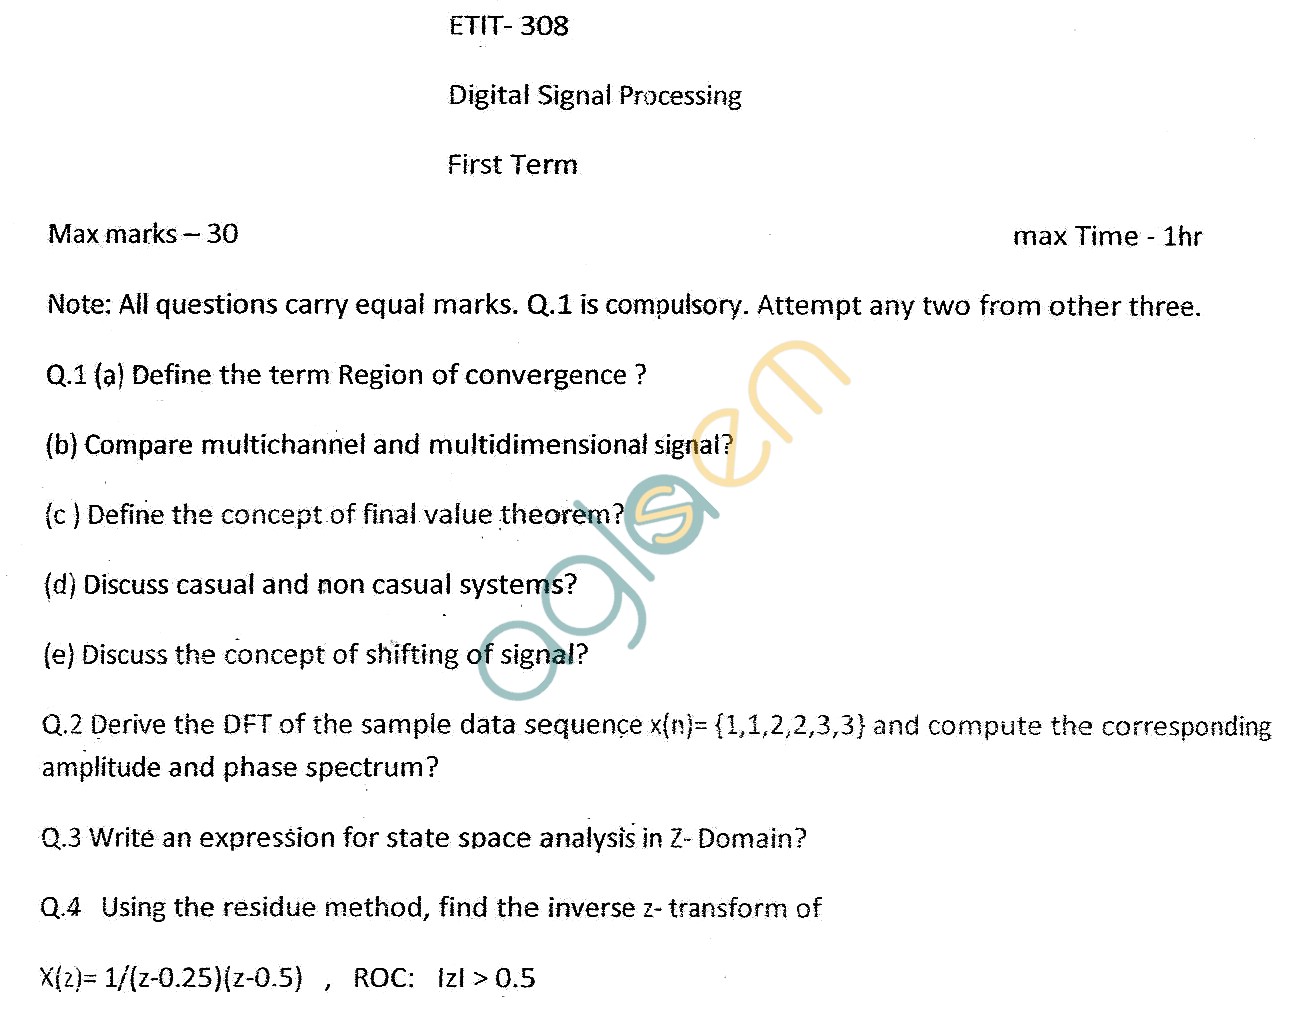 GGSIPU Question Papers Sixth Semester  First Term 2013  ETIT-308